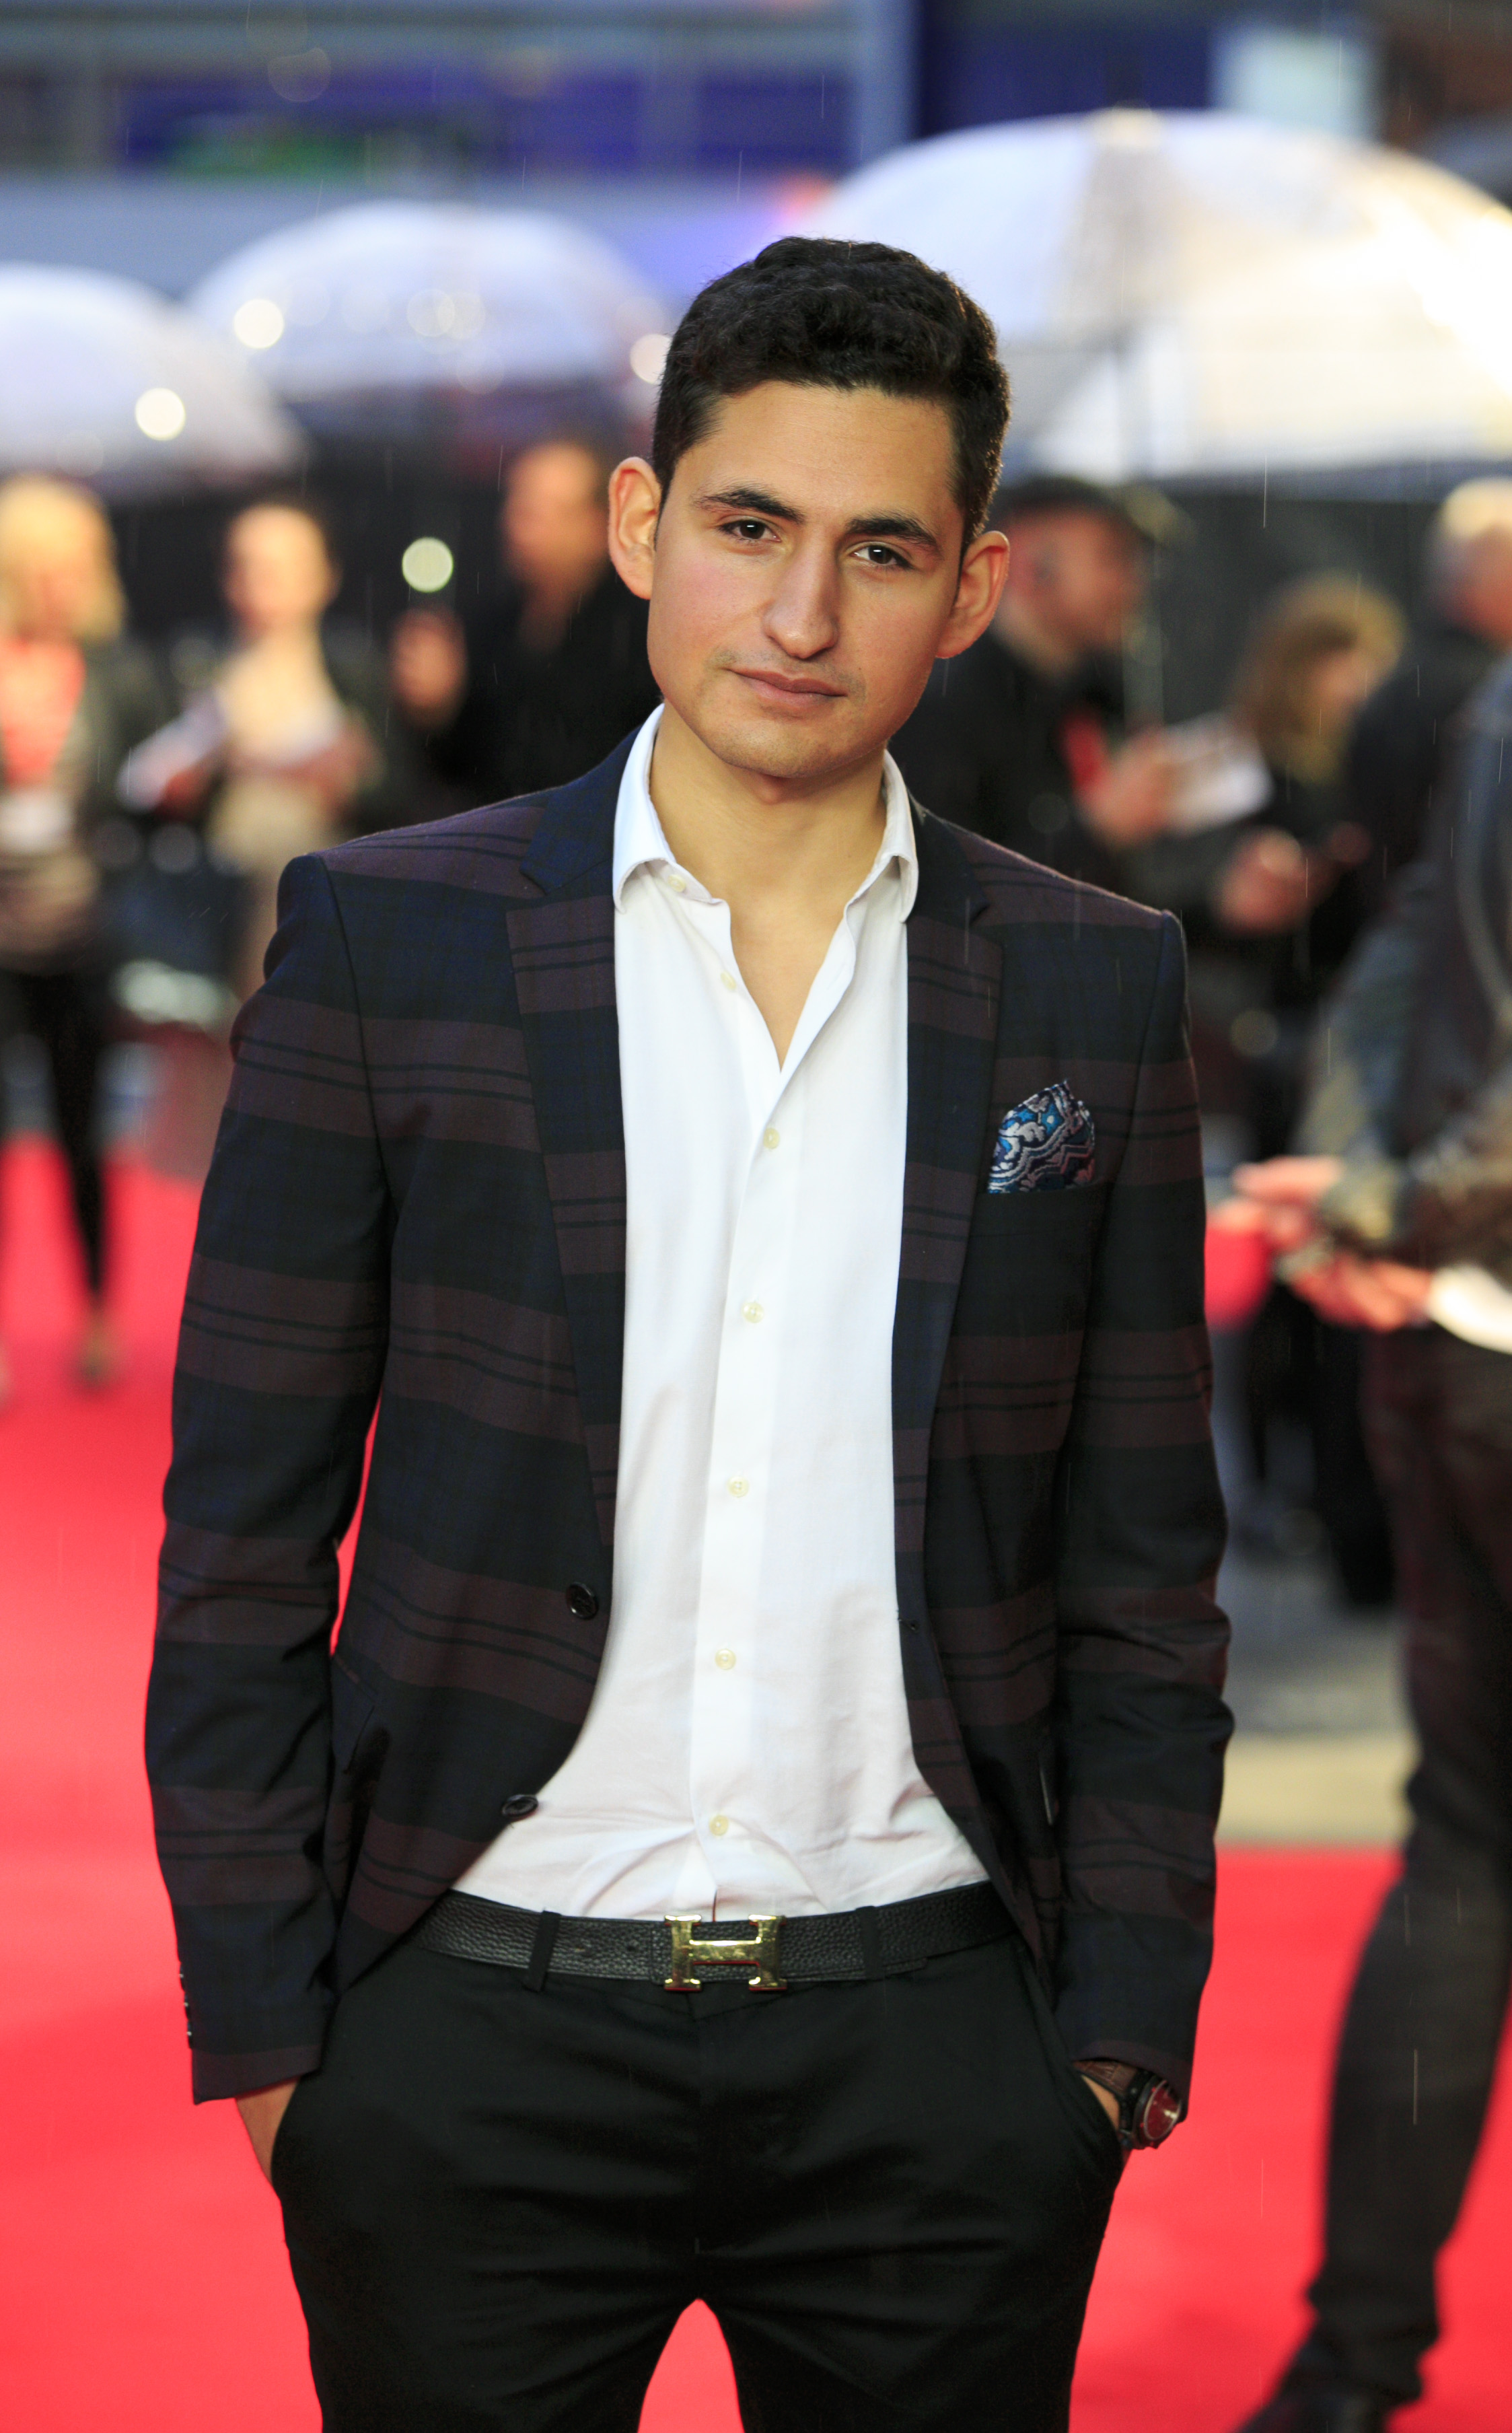 Amir El-Masry at London Film Festival for premiere of Rosewater